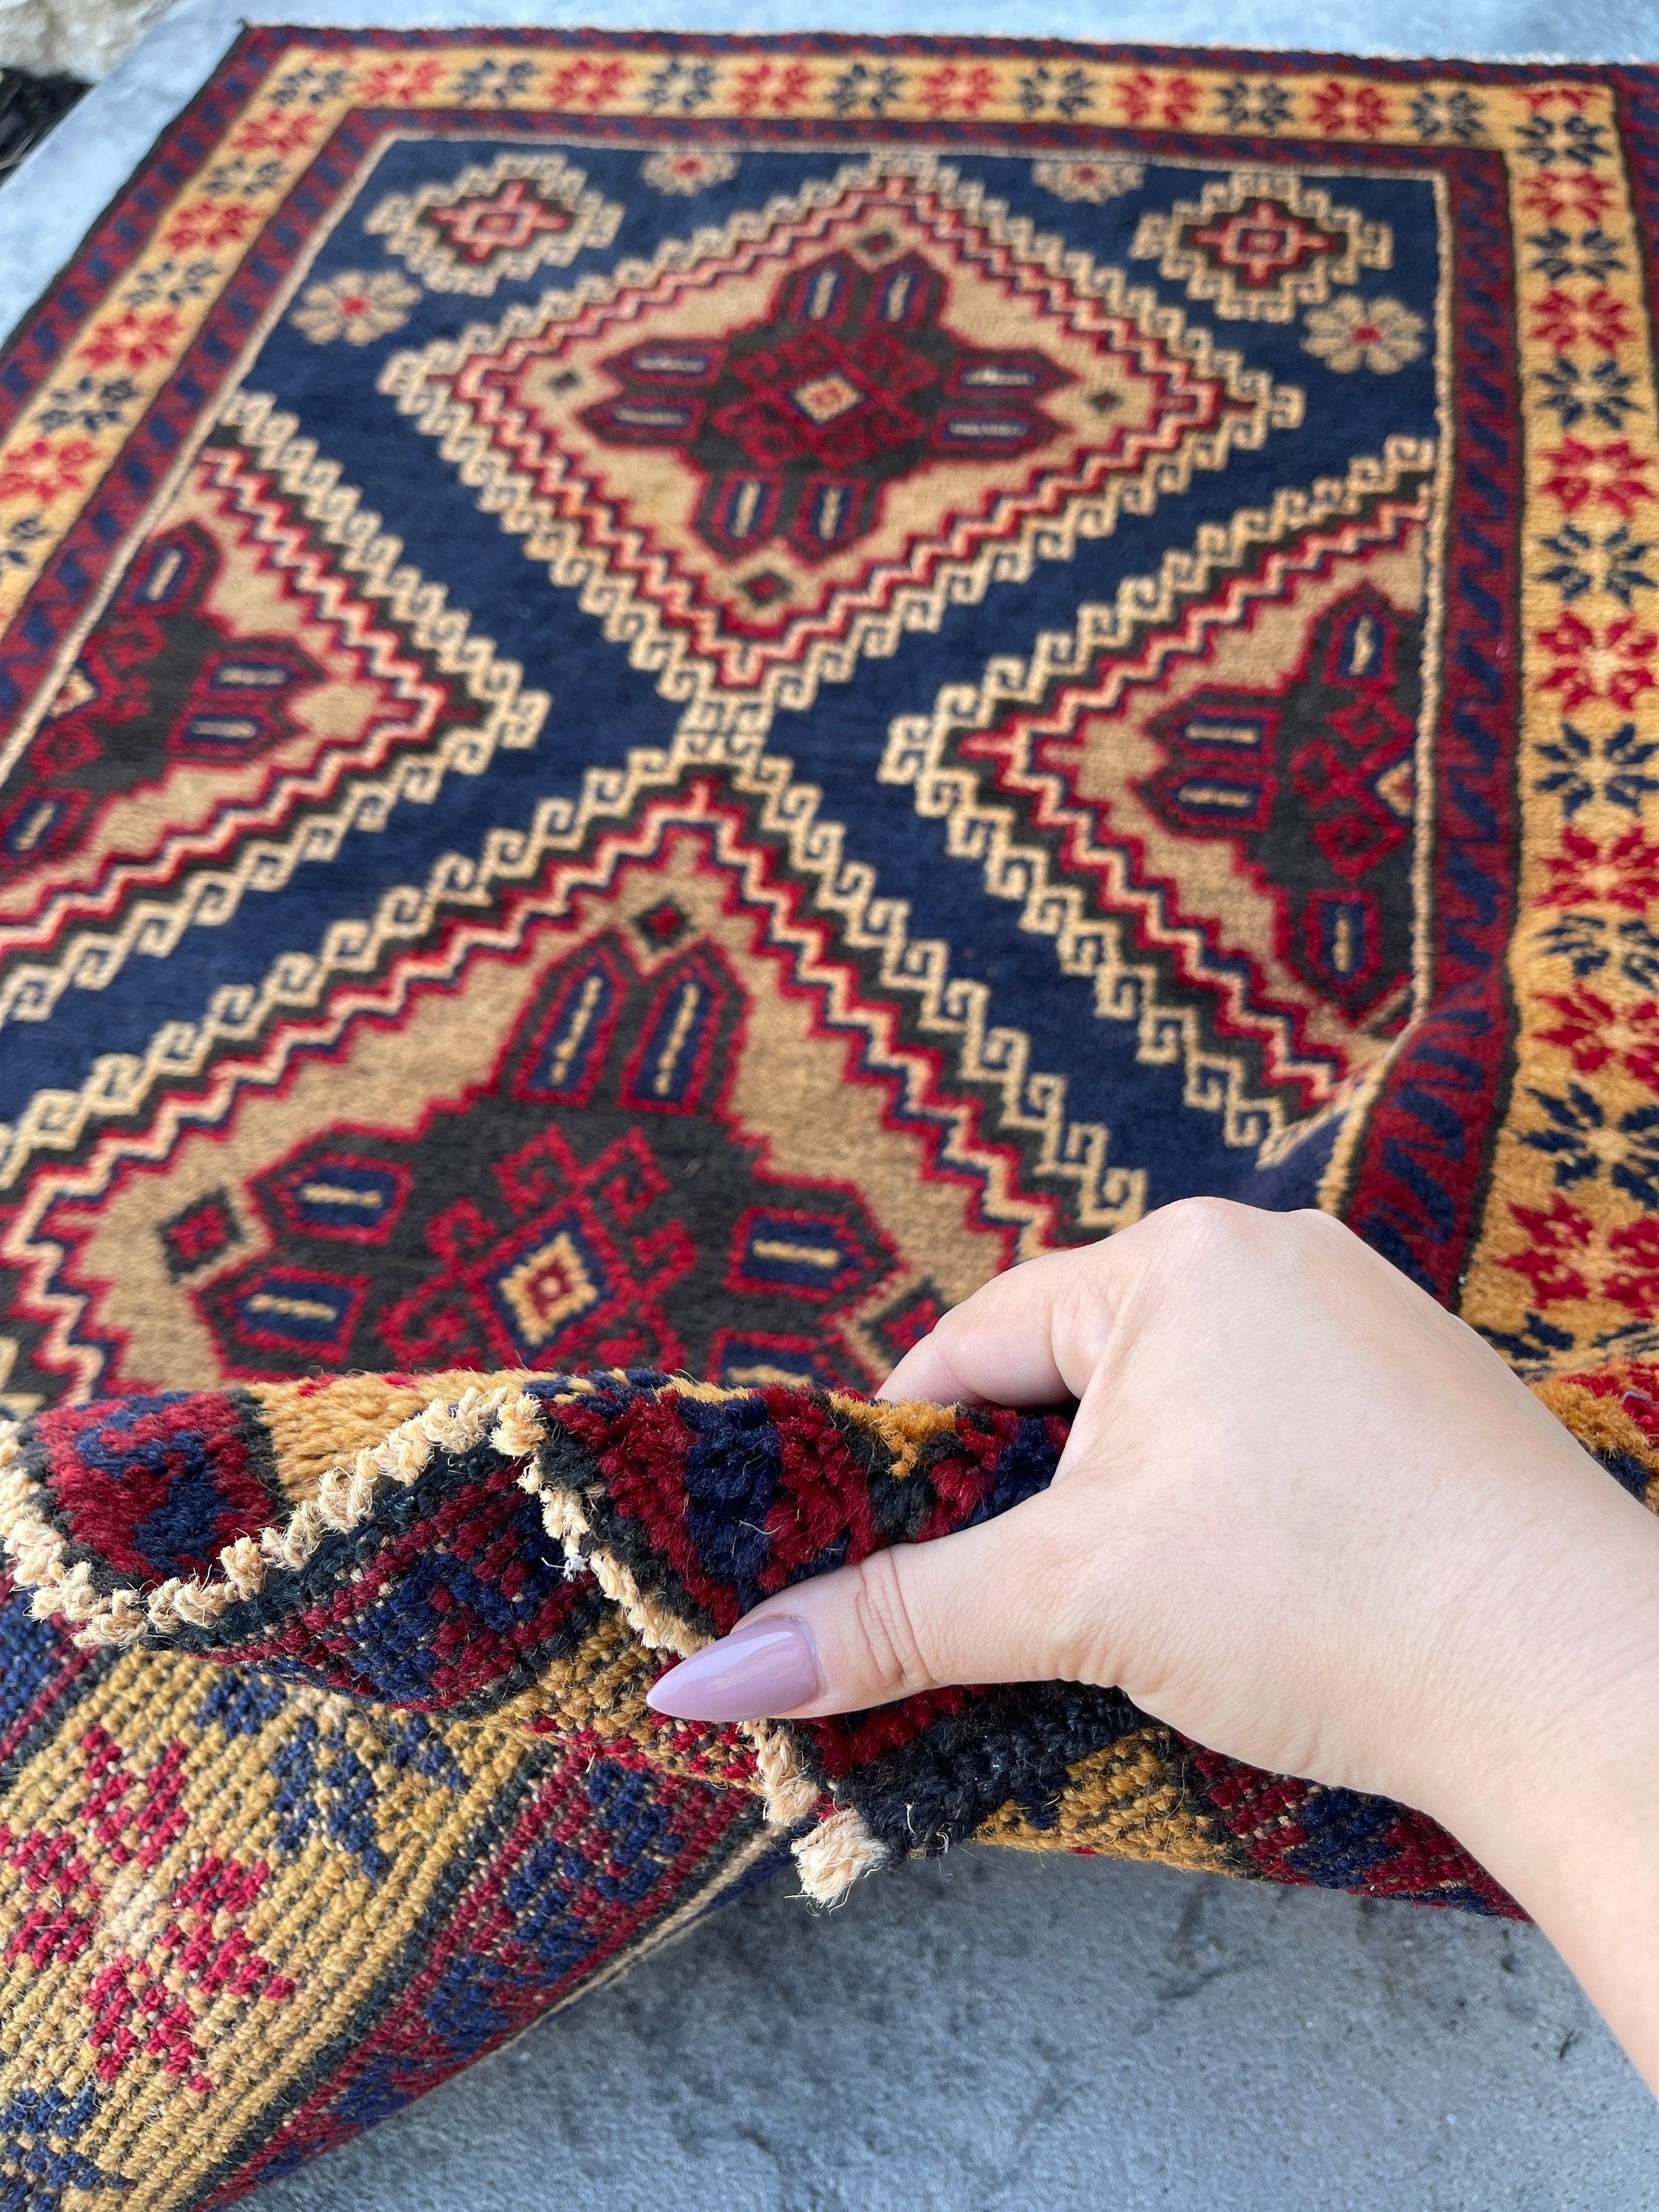 Contemporary Hand-Knotted Afghan Baluch Rug Premium Hand-Spun Afghan Wool Fair Trade For Sale